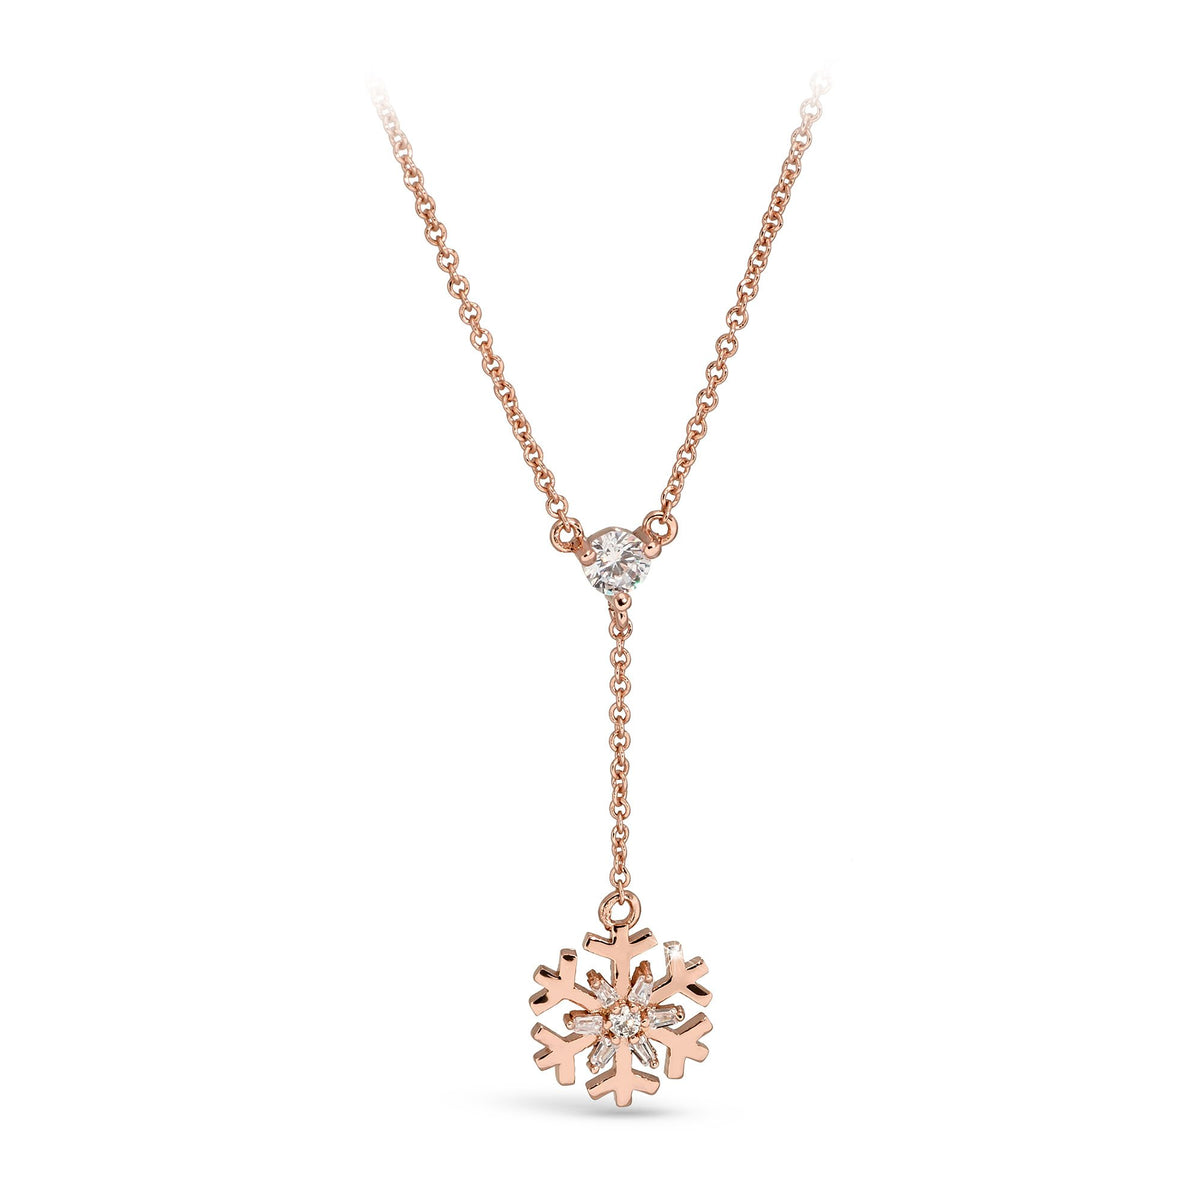 Snow Charm Necklace - 18K Rose Gold Plated - Crystal | Pica LeLa ...